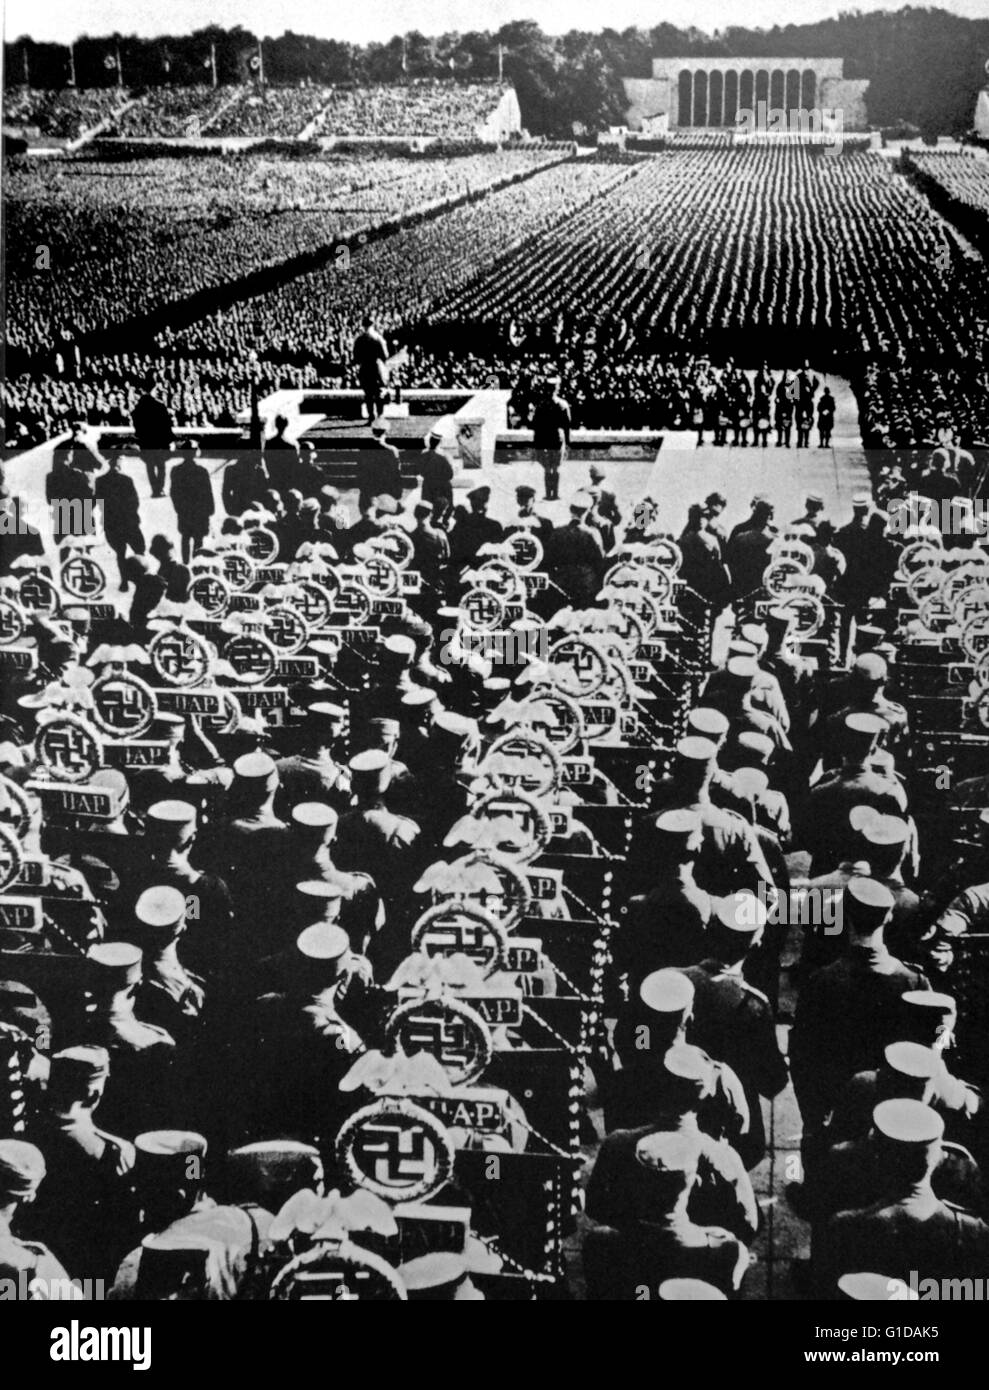 The Nuremberg Rallies were the annual rally of the Nazi Party in Germany, held from 1923 to 1938. They were large Nazi propaganda event. Stock Photo